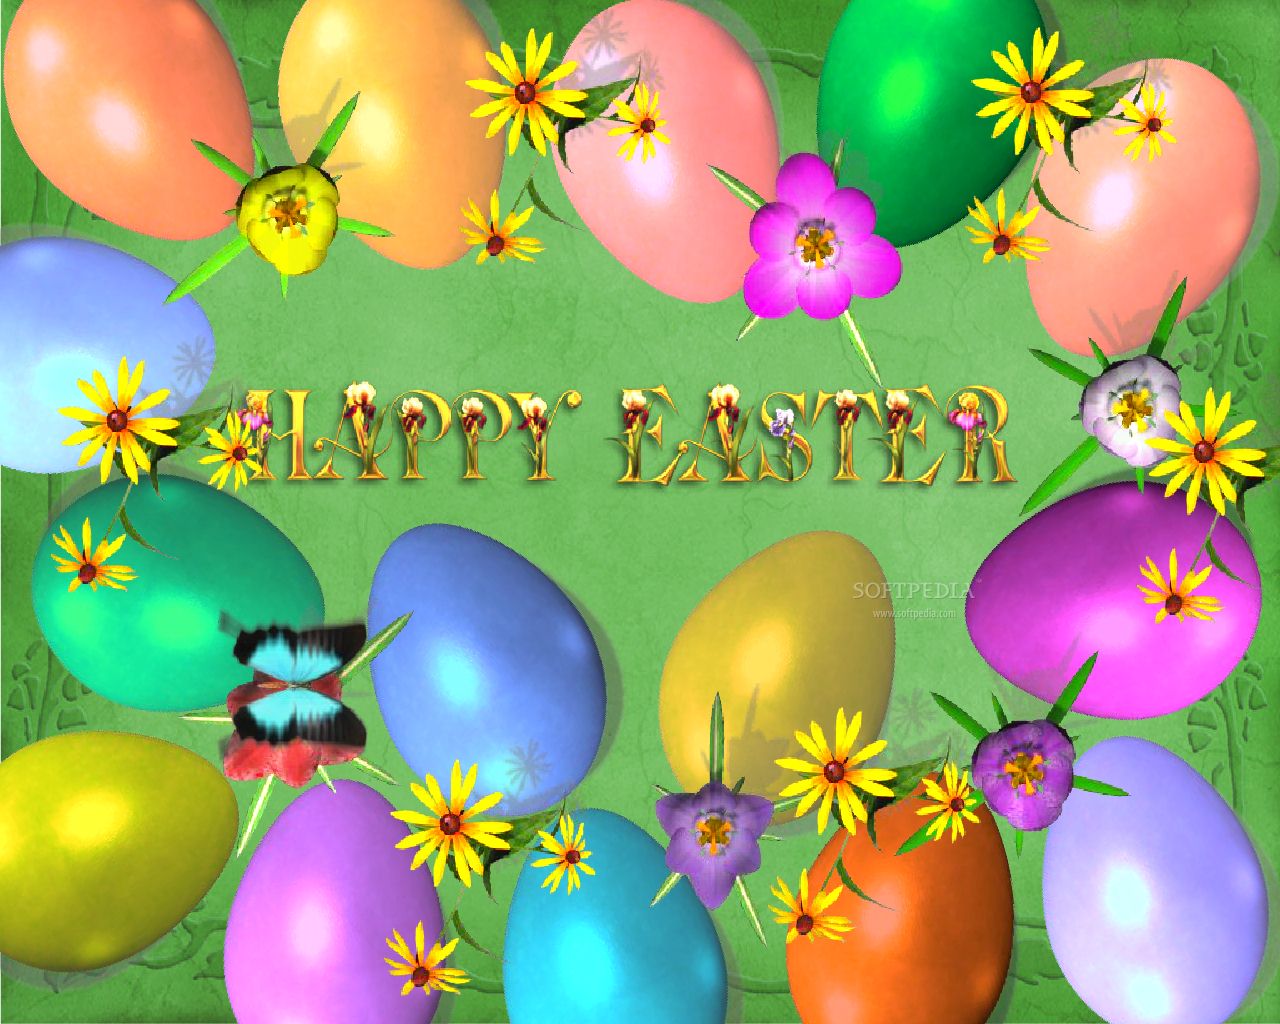 Image gallary Beautiful Happy Easter Wallpapers for Desktop